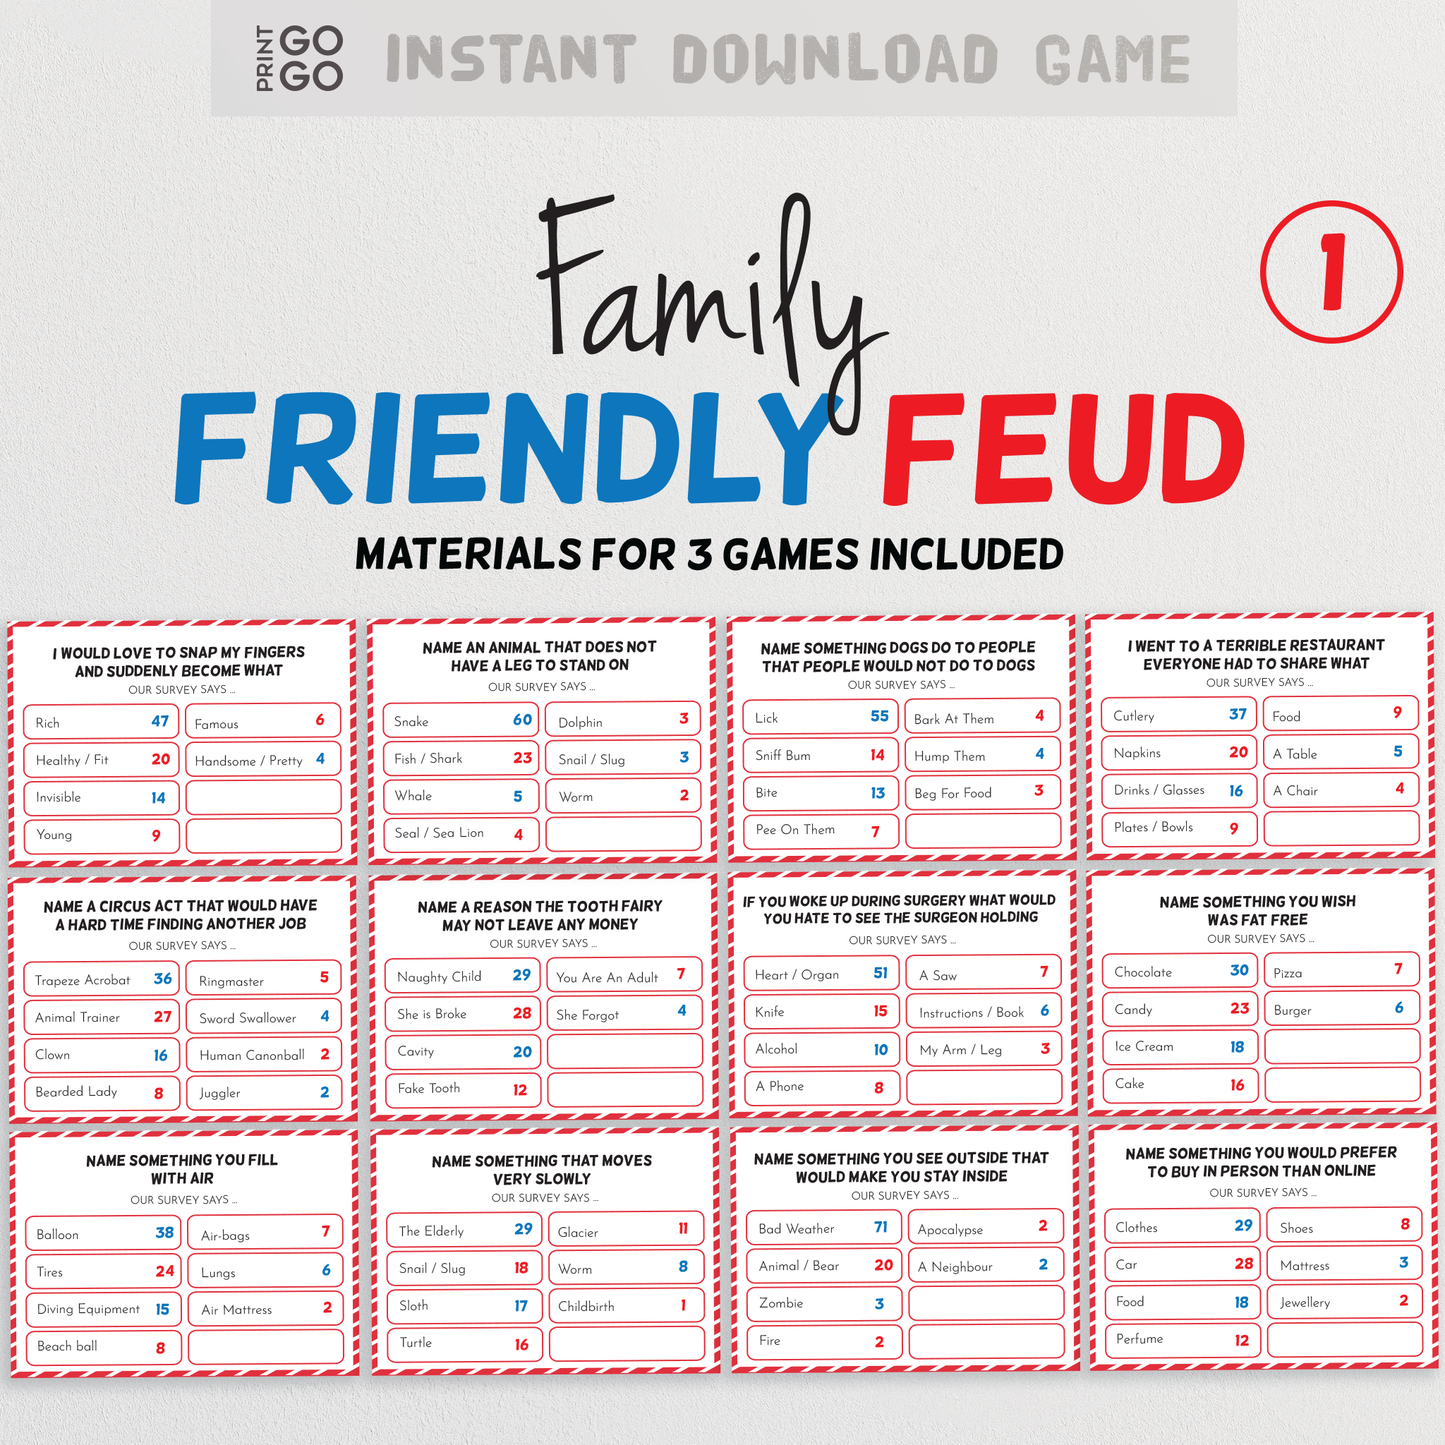 Family Friendly Feud - The Hilarious Party Game of Guessing Top Answers (Version 1)